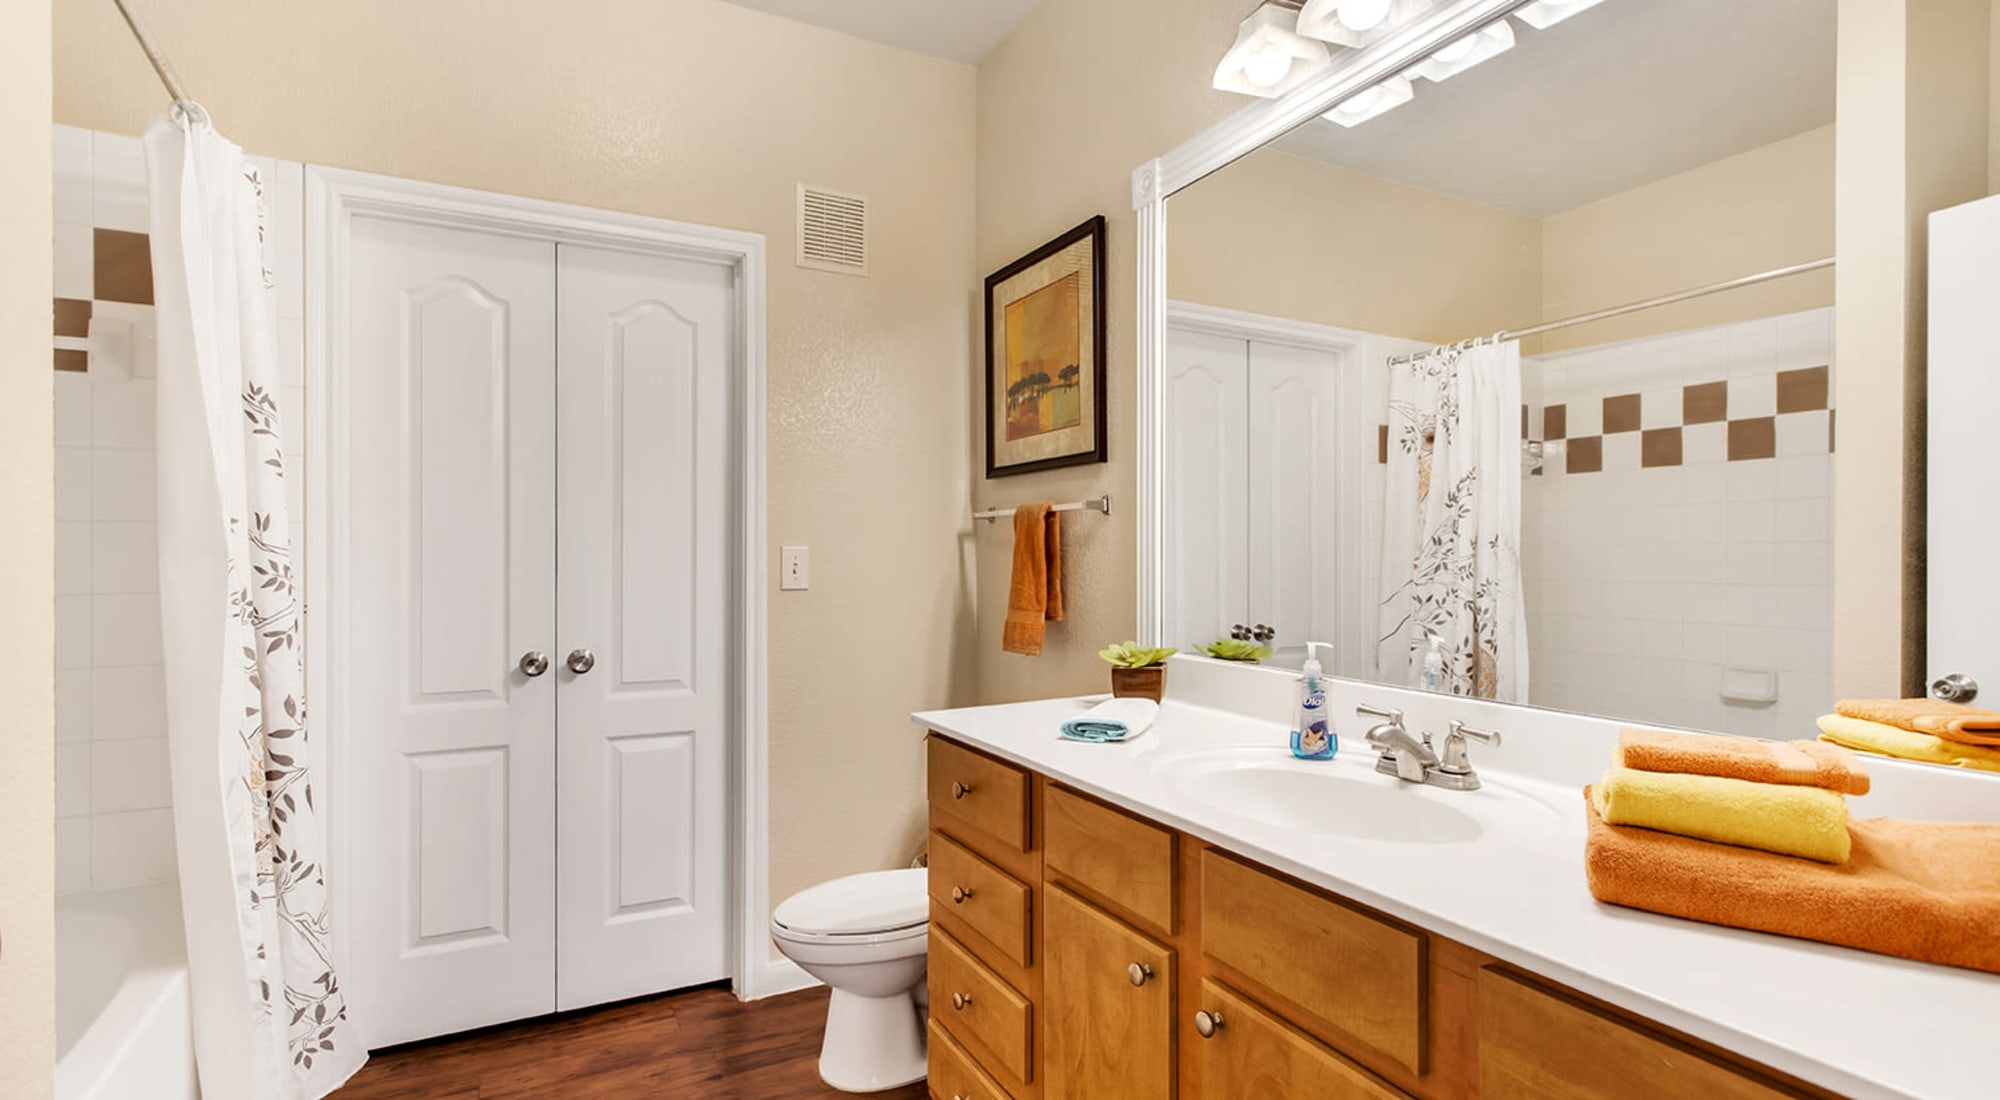 Bathroom with shower at Onion Creek